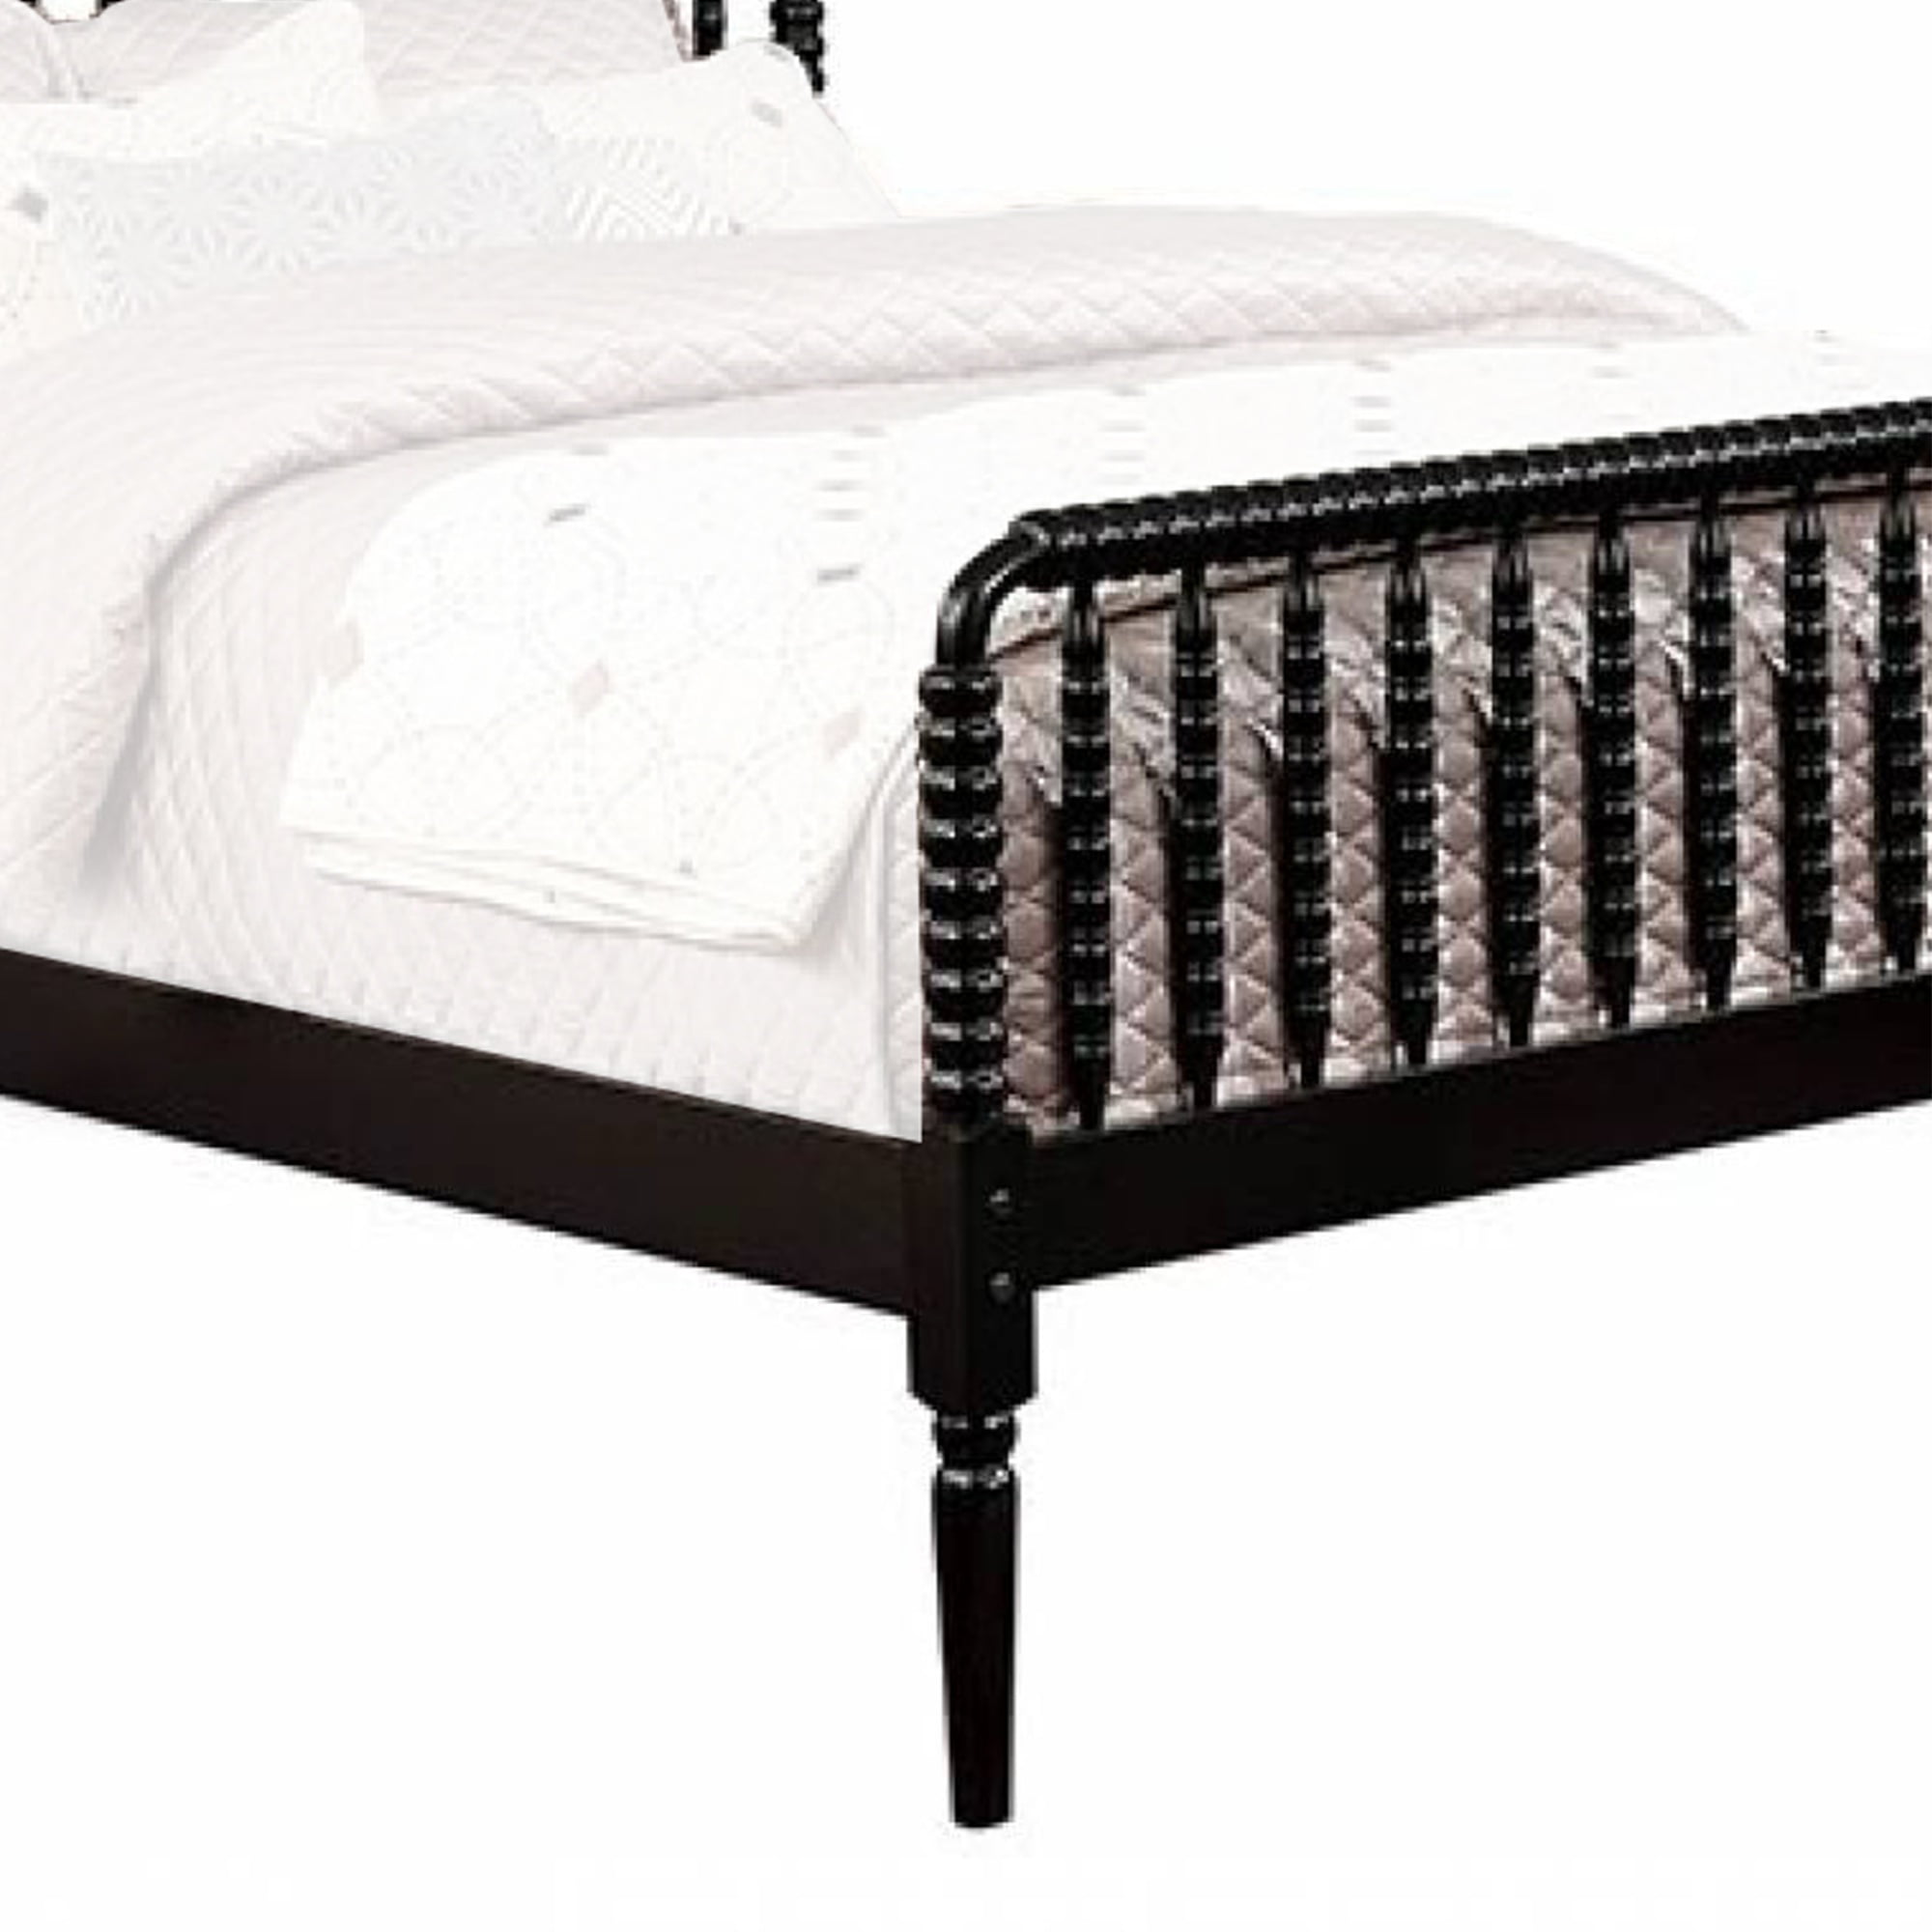 Wooden Full Size Bed With Spool Design Bed Frame And Turned Legs Black